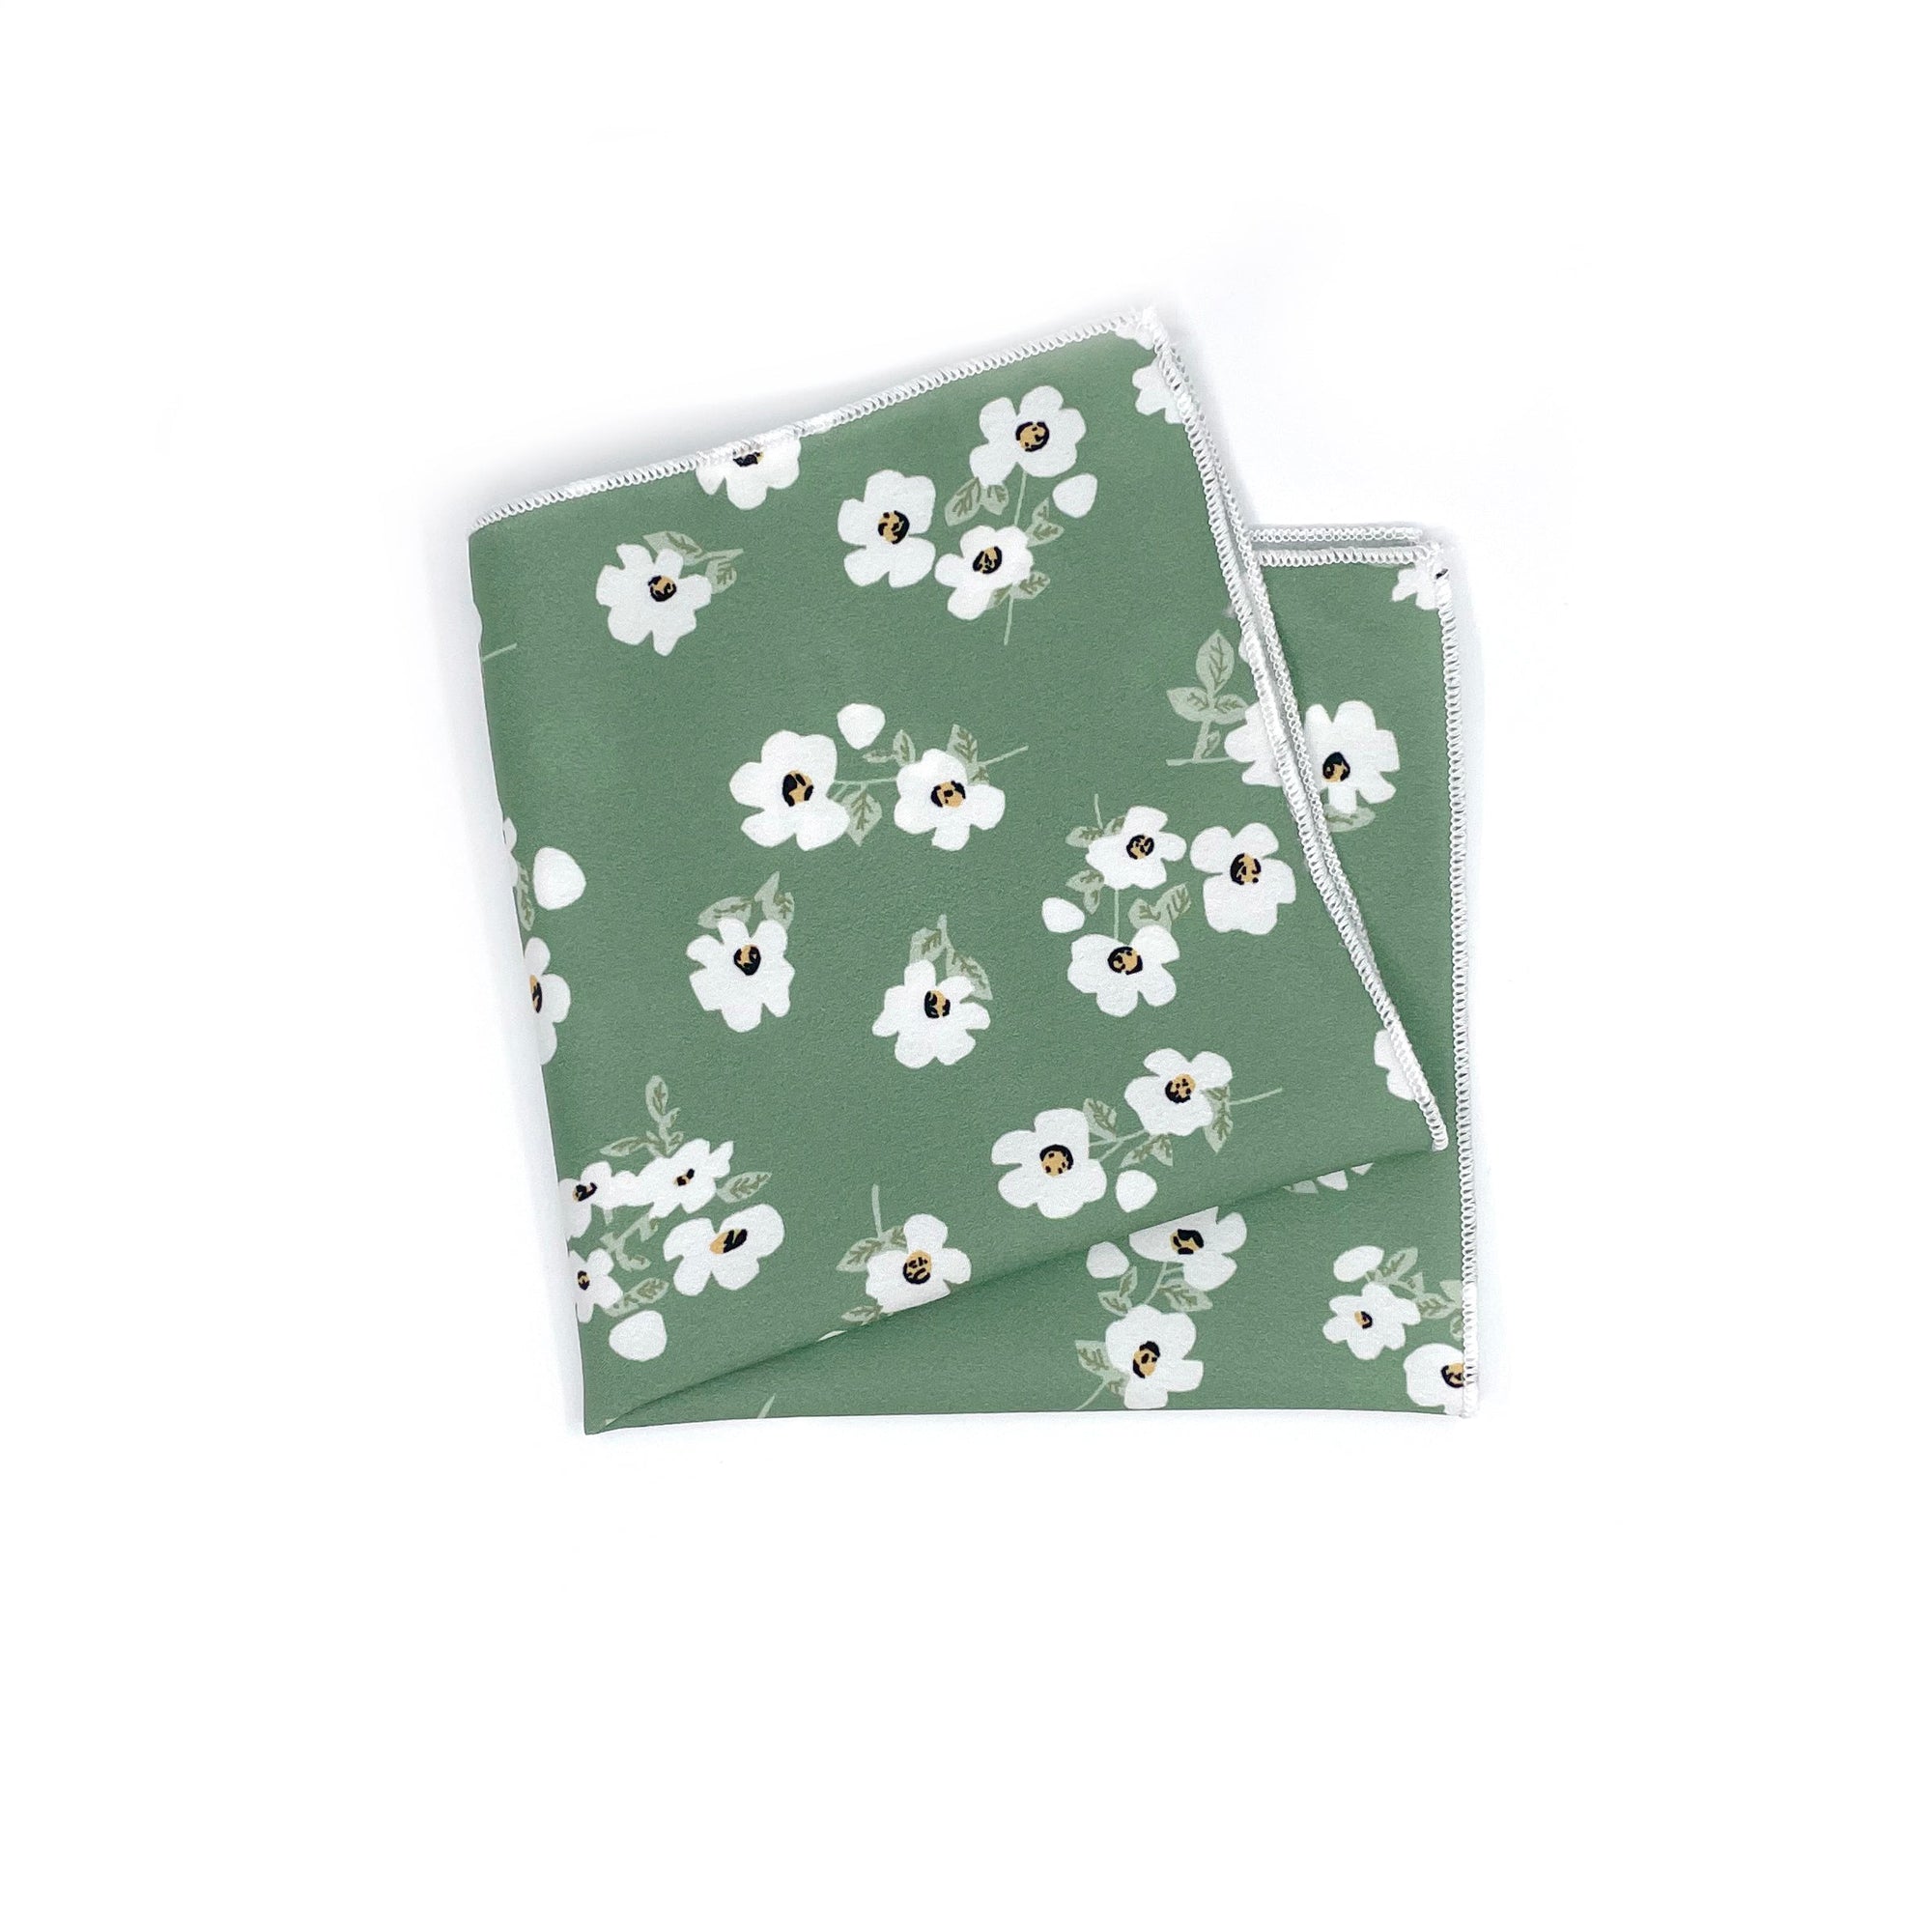 Sage Green Floral Pocket Square AUGUST Mytieshop Sage Green Floral Pocket square Color: Green Item Length: 23 cm ( 9 inches)Item Width : 22 cm (8.6 inches) Matching Necktie Add a touch of elegance to your look with this AUGUST Floral Pocket Square. Made with high-quality fabric, as a result this pocket square is perfect for any formal occasion. The beautiful floral design is sure to make you stand out from the crowd, and whether you&#39;re attending a wedding, a job interview, or a fancy dinner part